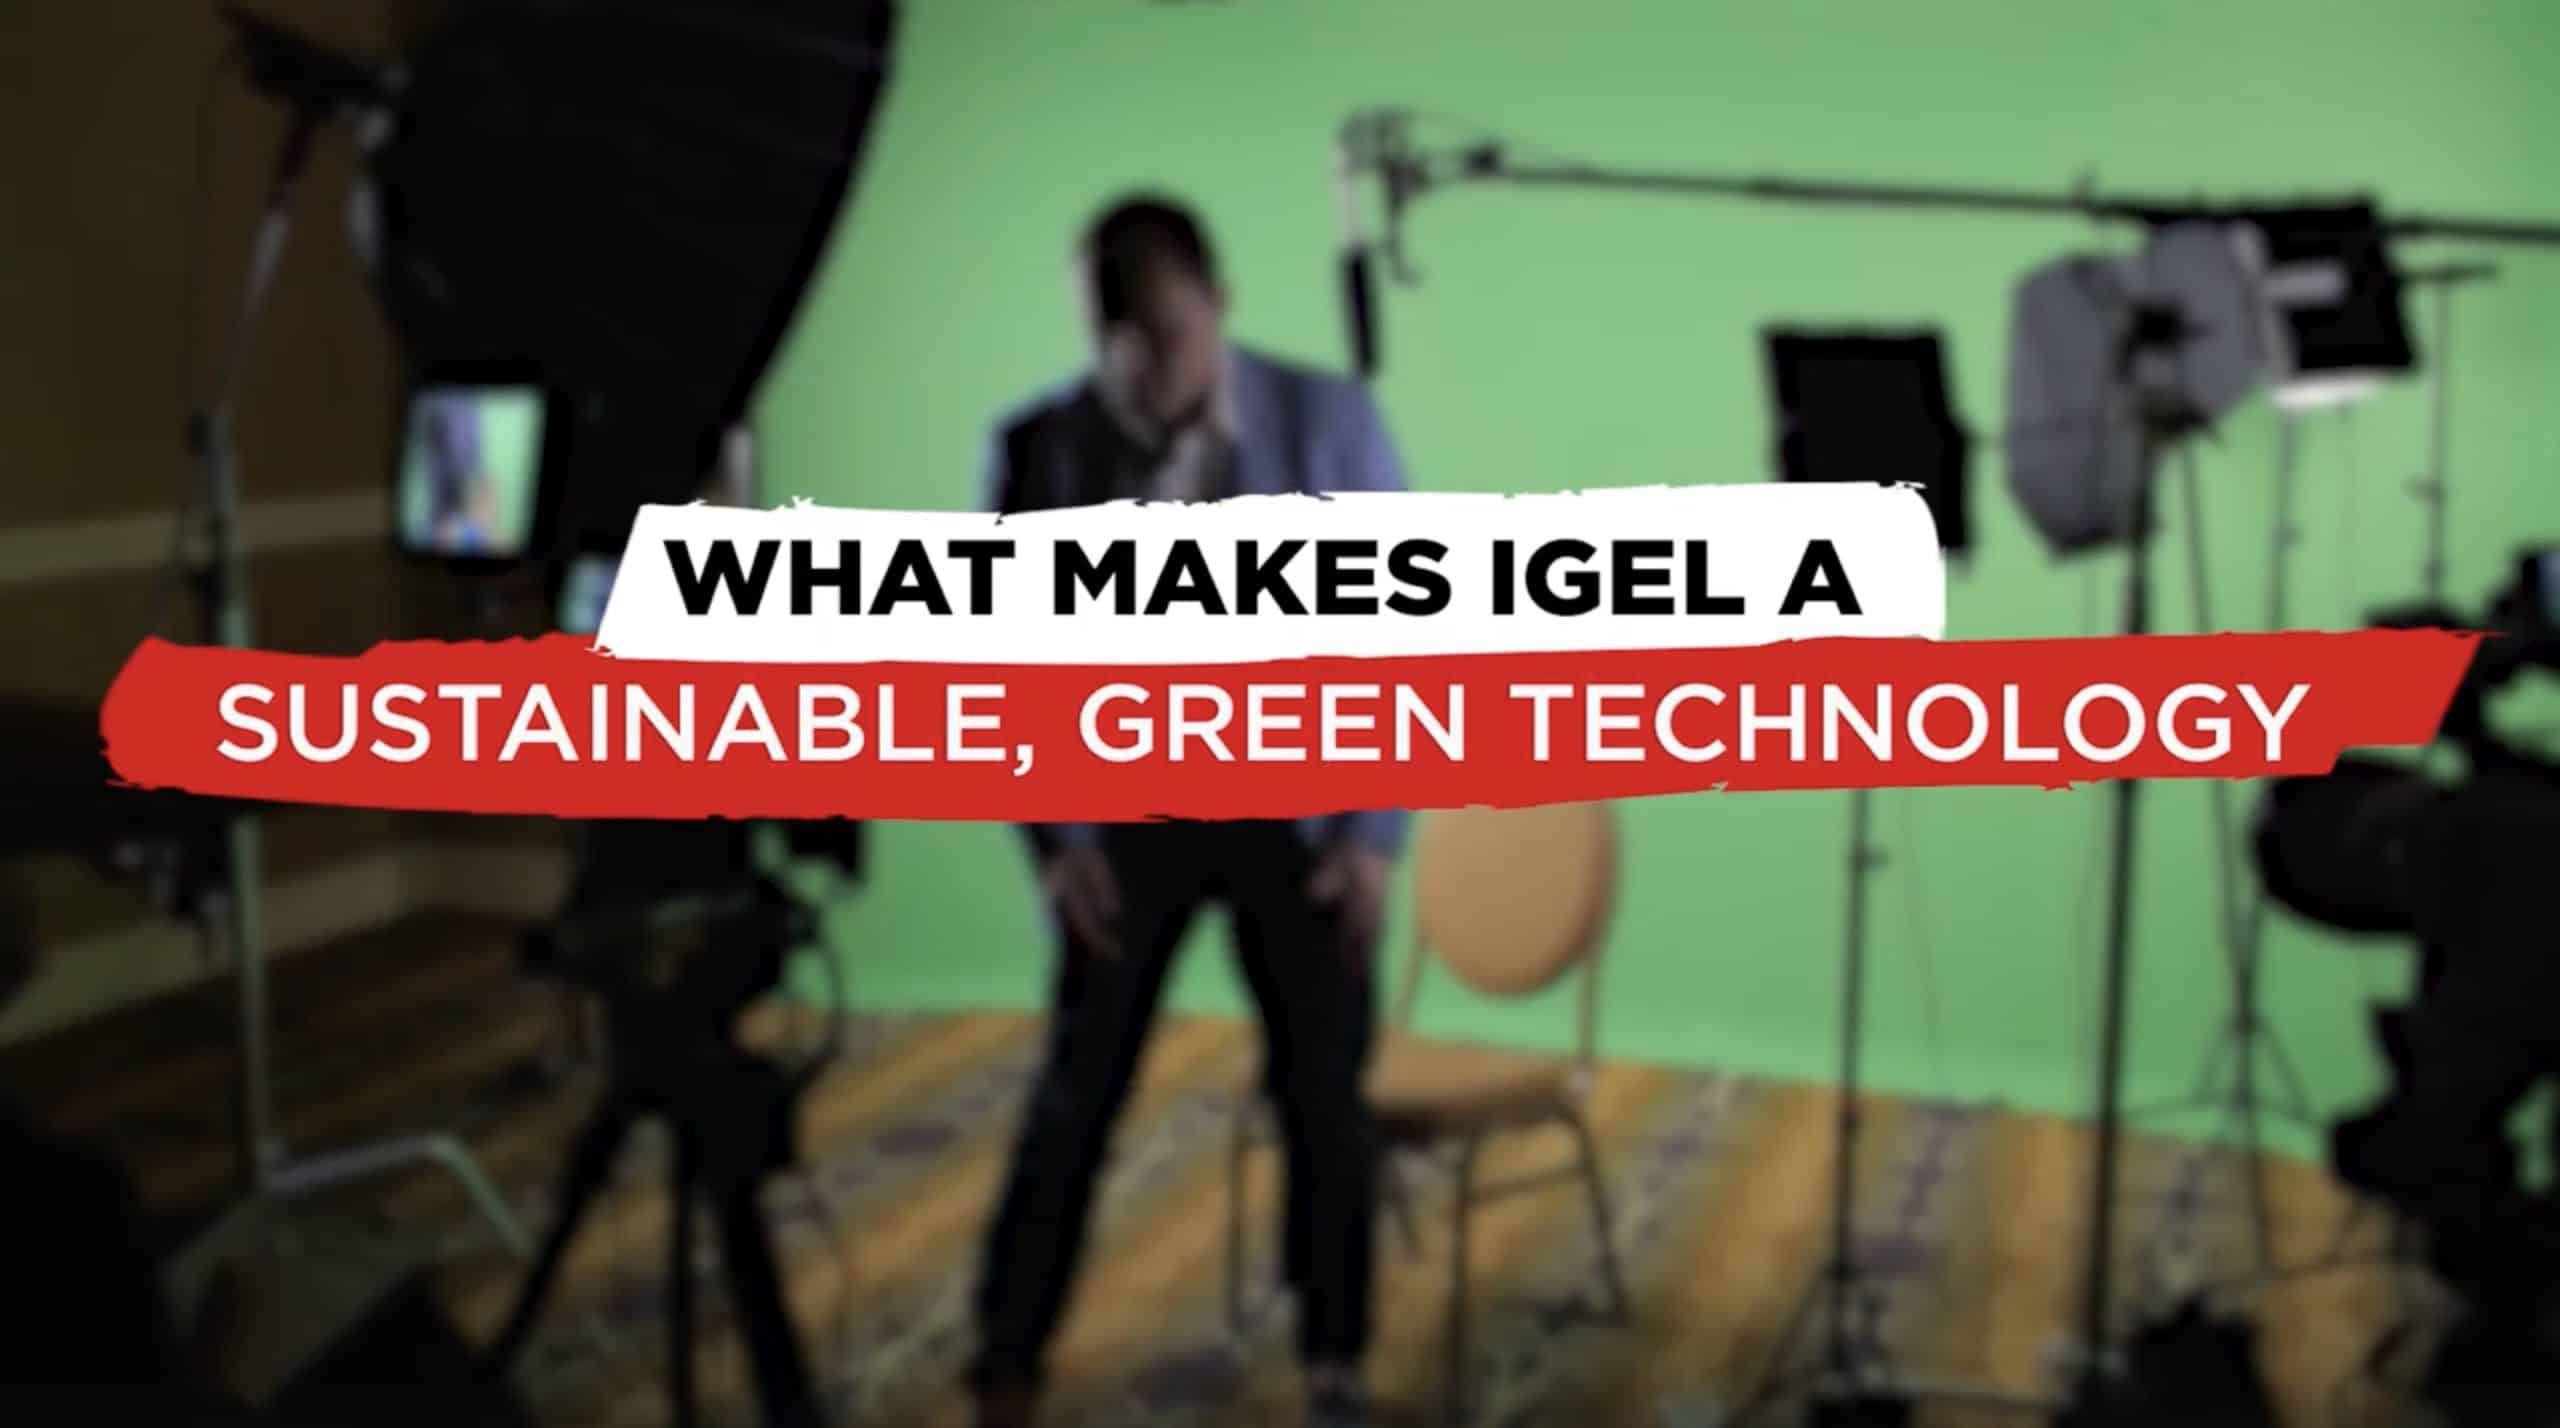 What Makes IGEL a Sustainable, Green Technology